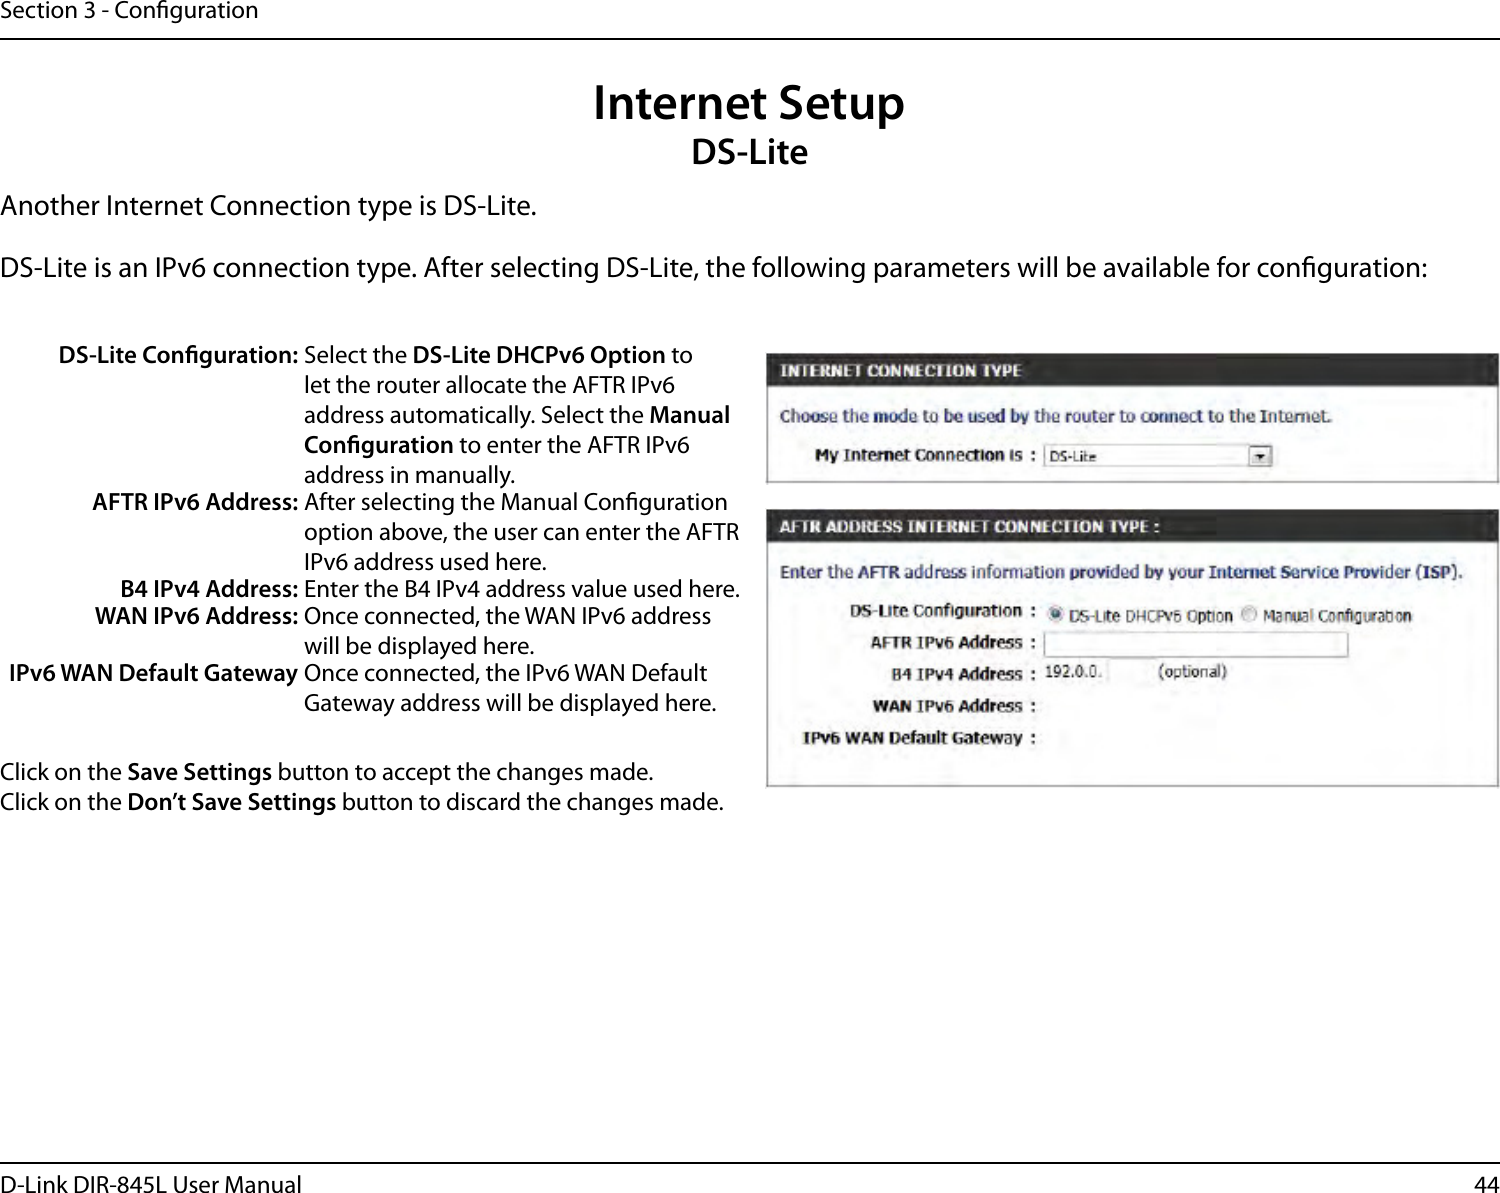 44D-Link DIR-845L User ManualSection 3 - CongurationInternet SetupDS-LiteAnother Internet Connection type is DS-Lite.DS-Lite is an IPv6 connection type. After selecting DS-Lite, the following parameters will be available for conguration:DS-Lite Conguration: Select the DS-Lite DHCPv6 Option to let the router allocate the AFTR IPv6 address automatically. Select the Manual Conguration to enter the AFTR IPv6 address in manually.AFTR IPv6 Address: After selecting the Manual Conguration option above, the user can enter the AFTR IPv6 address used here.B4 IPv4 Address: Enter the B4 IPv4 address value used here.WAN IPv6 Address: Once connected, the WAN IPv6 address will be displayed here.IPv6 WAN Default Gateway Once connected, the IPv6 WAN Default Gateway address will be displayed here.Click on the Save Settings button to accept the changes made.Click on the Don’t Save Settings button to discard the changes made.